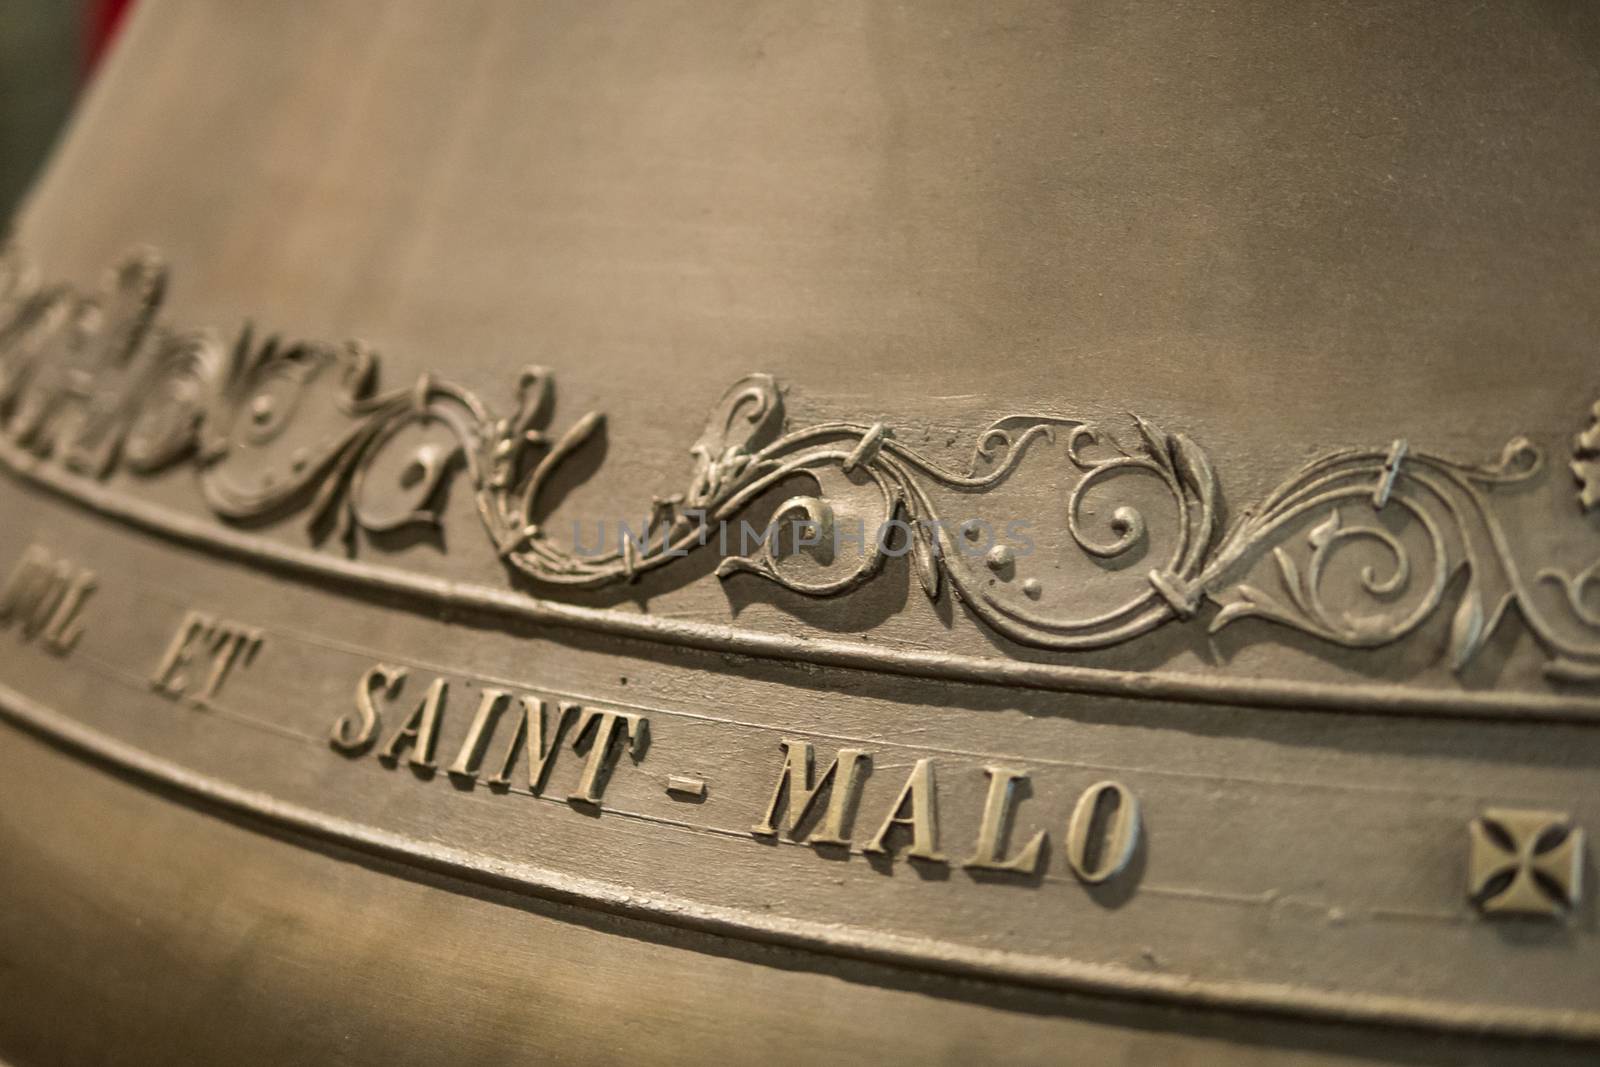 Name of city of Saint Malo engraved on cathedral new bronze bellSaint Malo, France by ontheroadagain